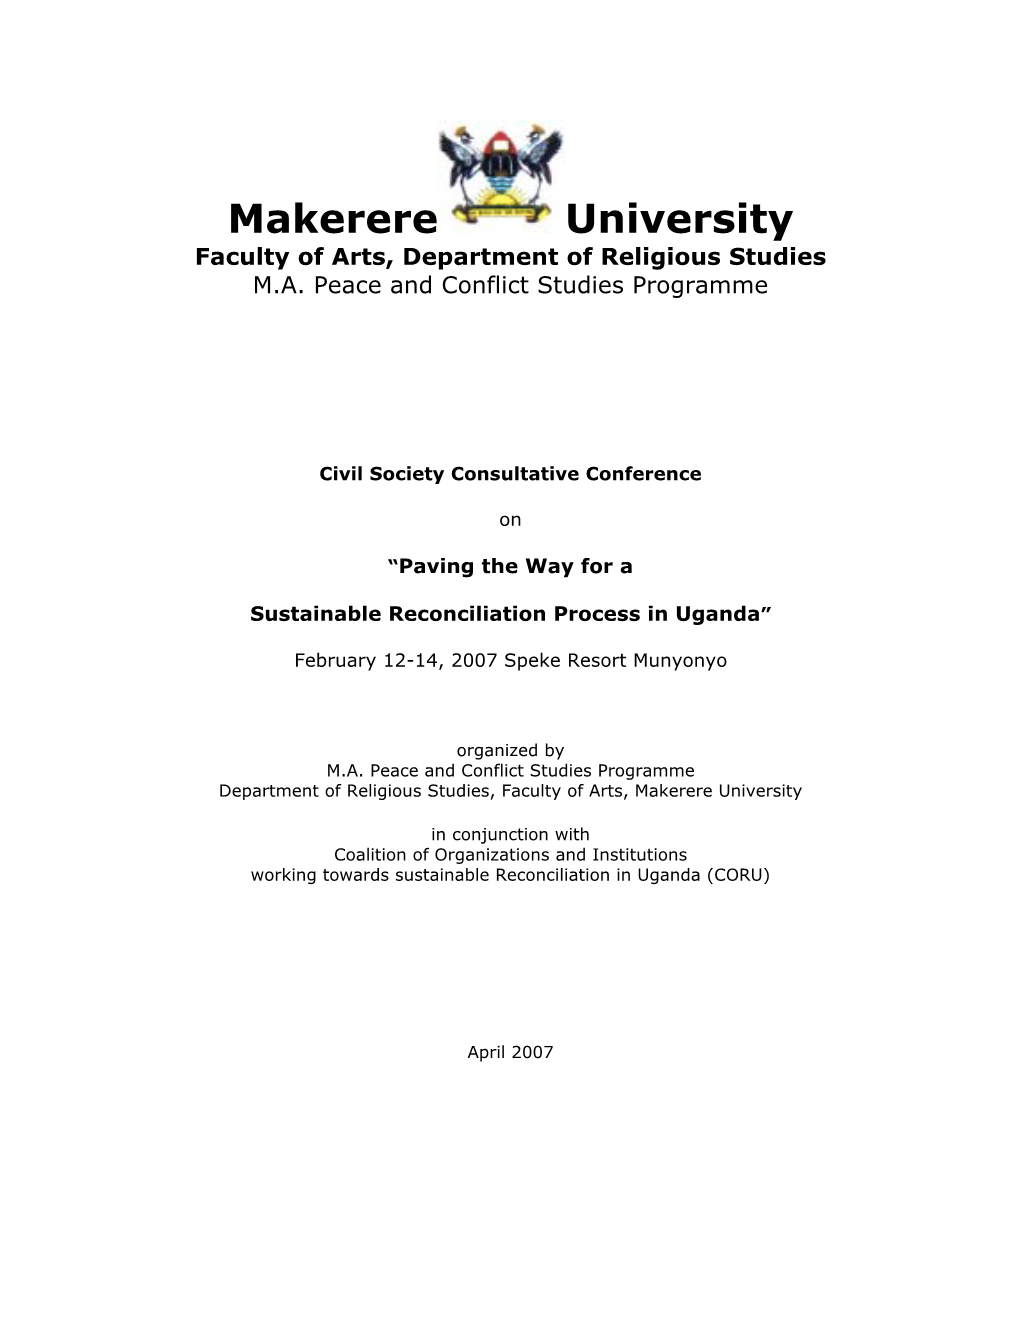 Makerere University Faculty of Arts, Department of Religious Studies M.A